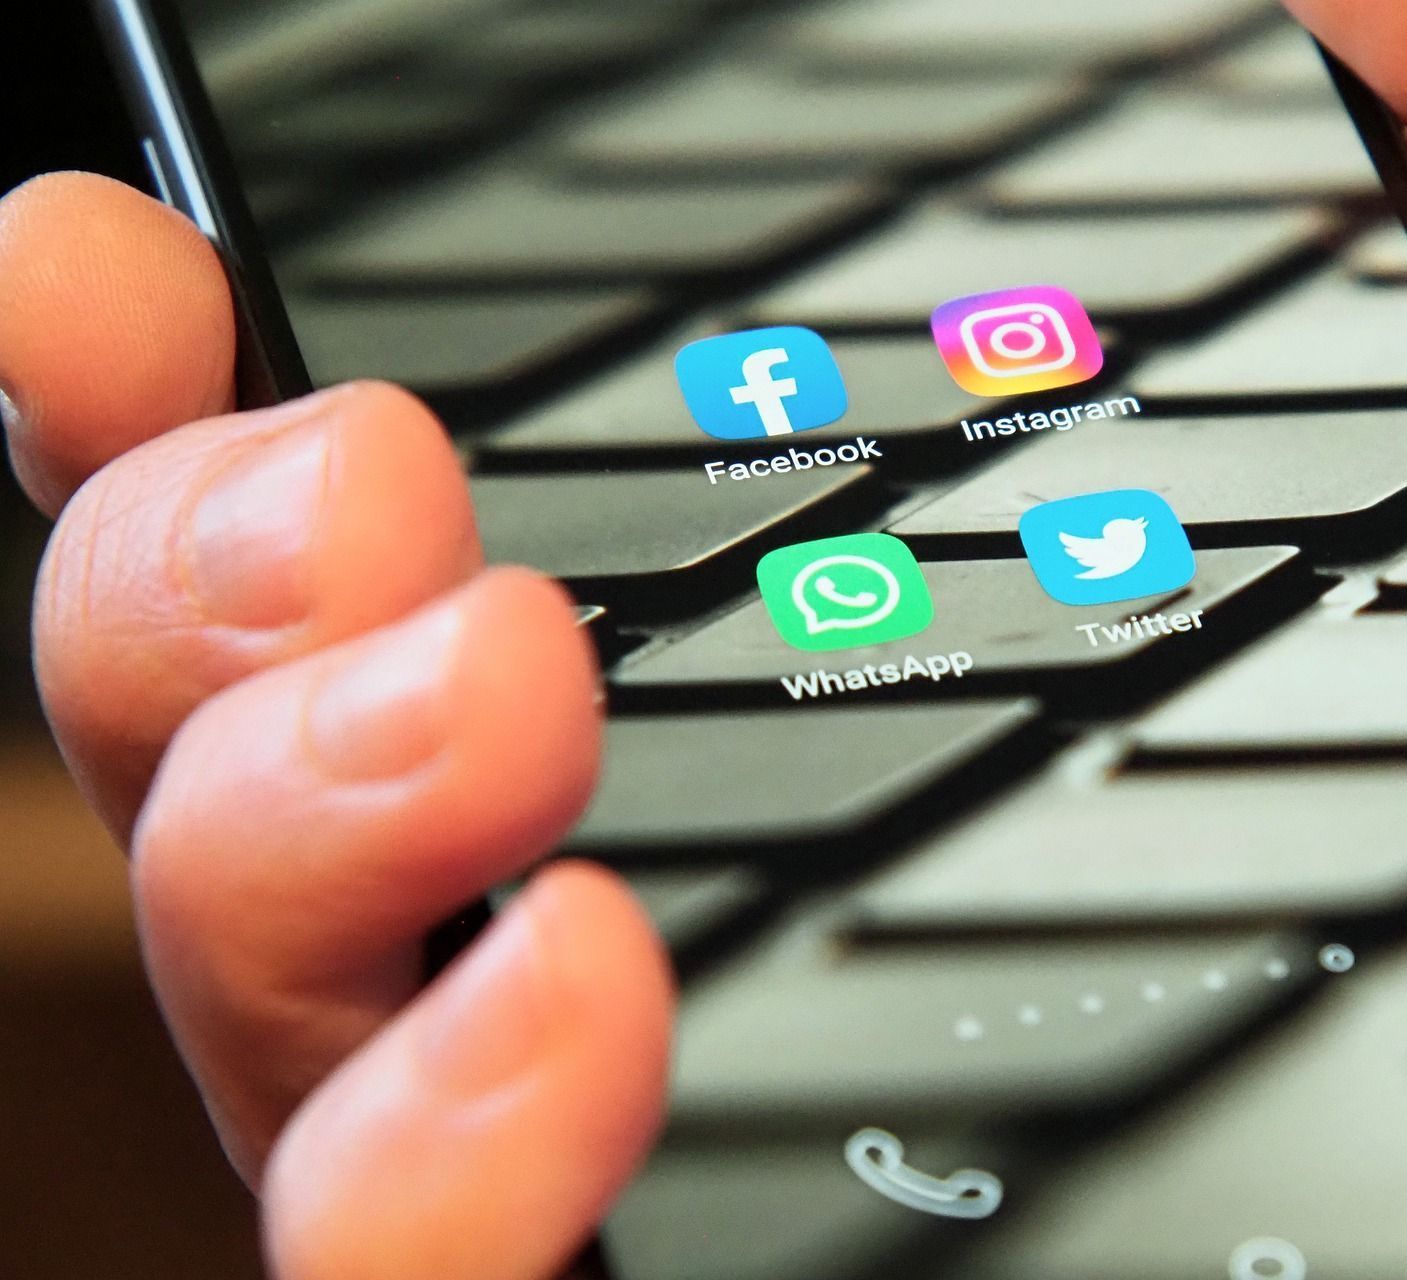 close up image a hand holding a mobile phone with the screen showing four social media icons